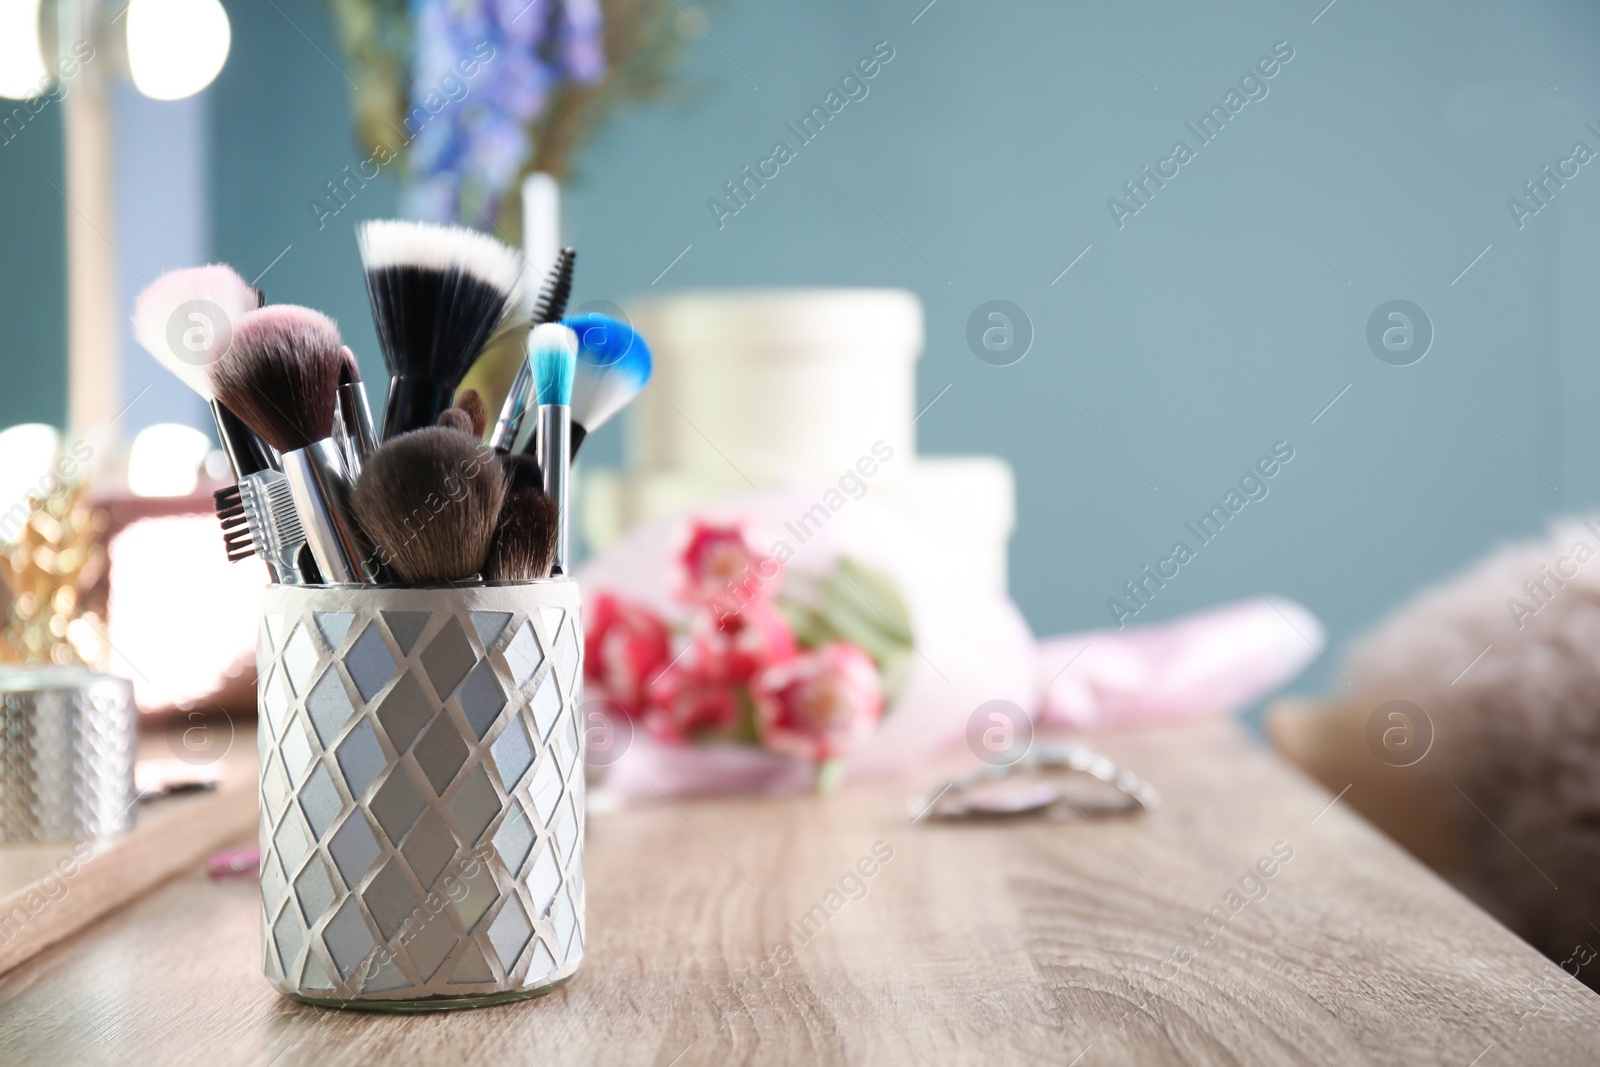 Photo of Holder with professional makeup brushes on wooden table